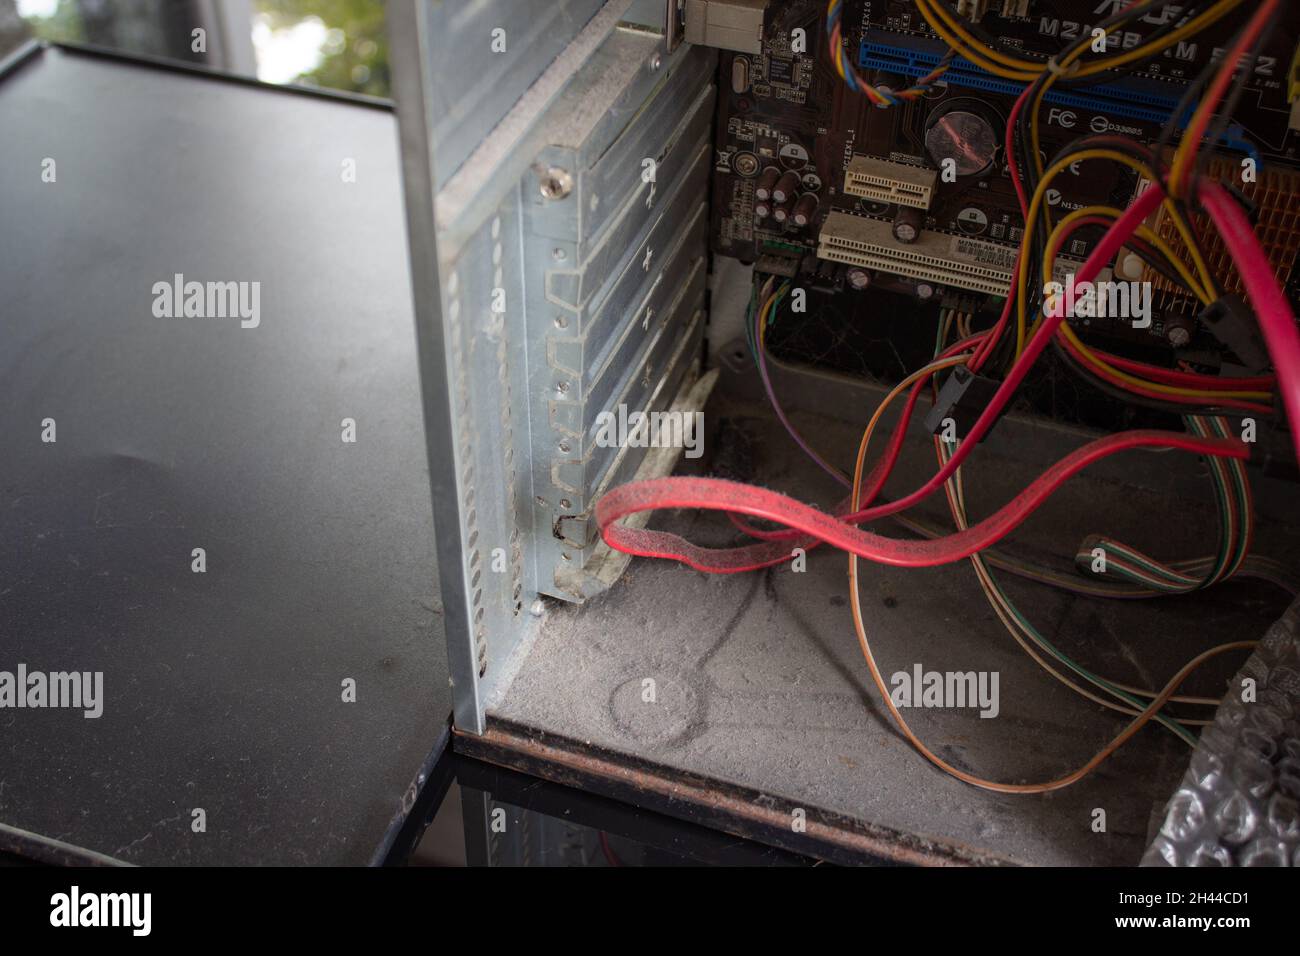 An old family computer filled with spider webs, dust and viruses. Maintenance is a key to keep computers healthy and working. Stock Photo